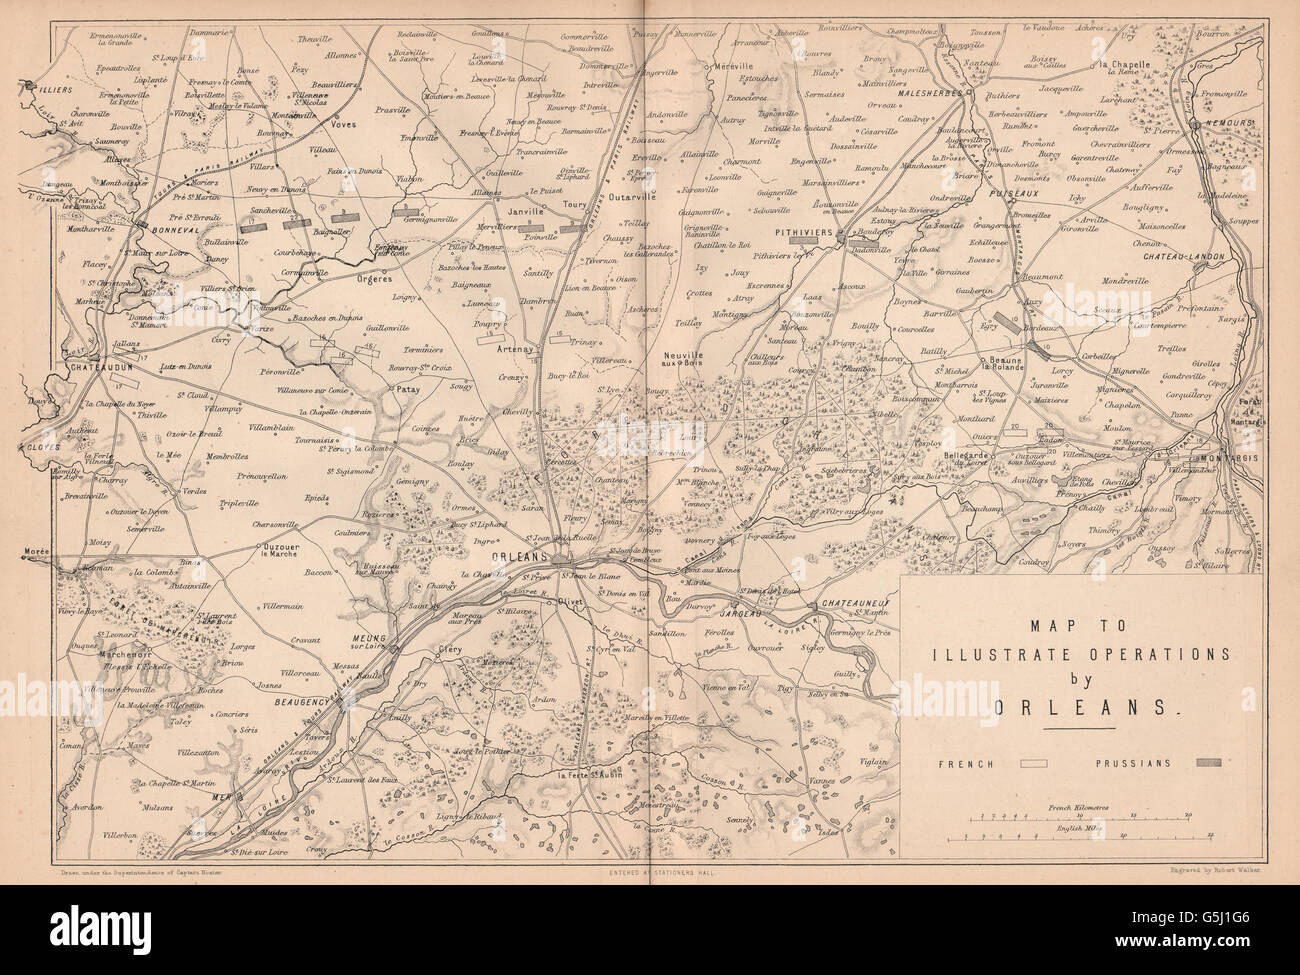 FRANCO-PRUSSIAN WAR: Operations around Orleans/Orléans. Loire valley, 1875 map Stock Photo